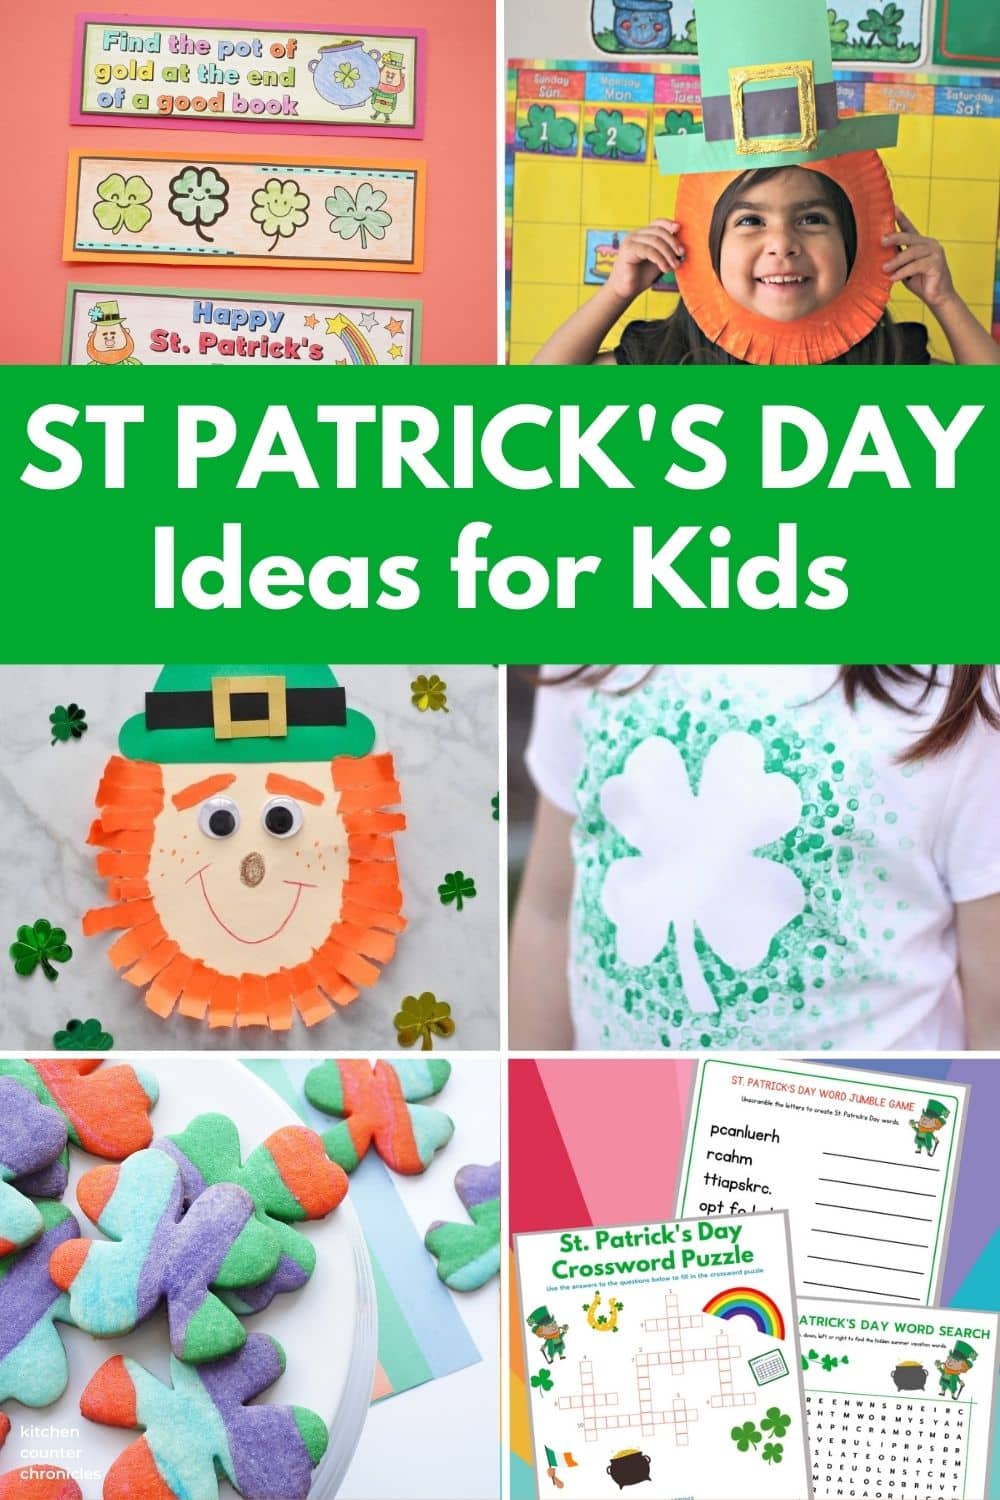 collage of st patricks day activities and crafts for kids